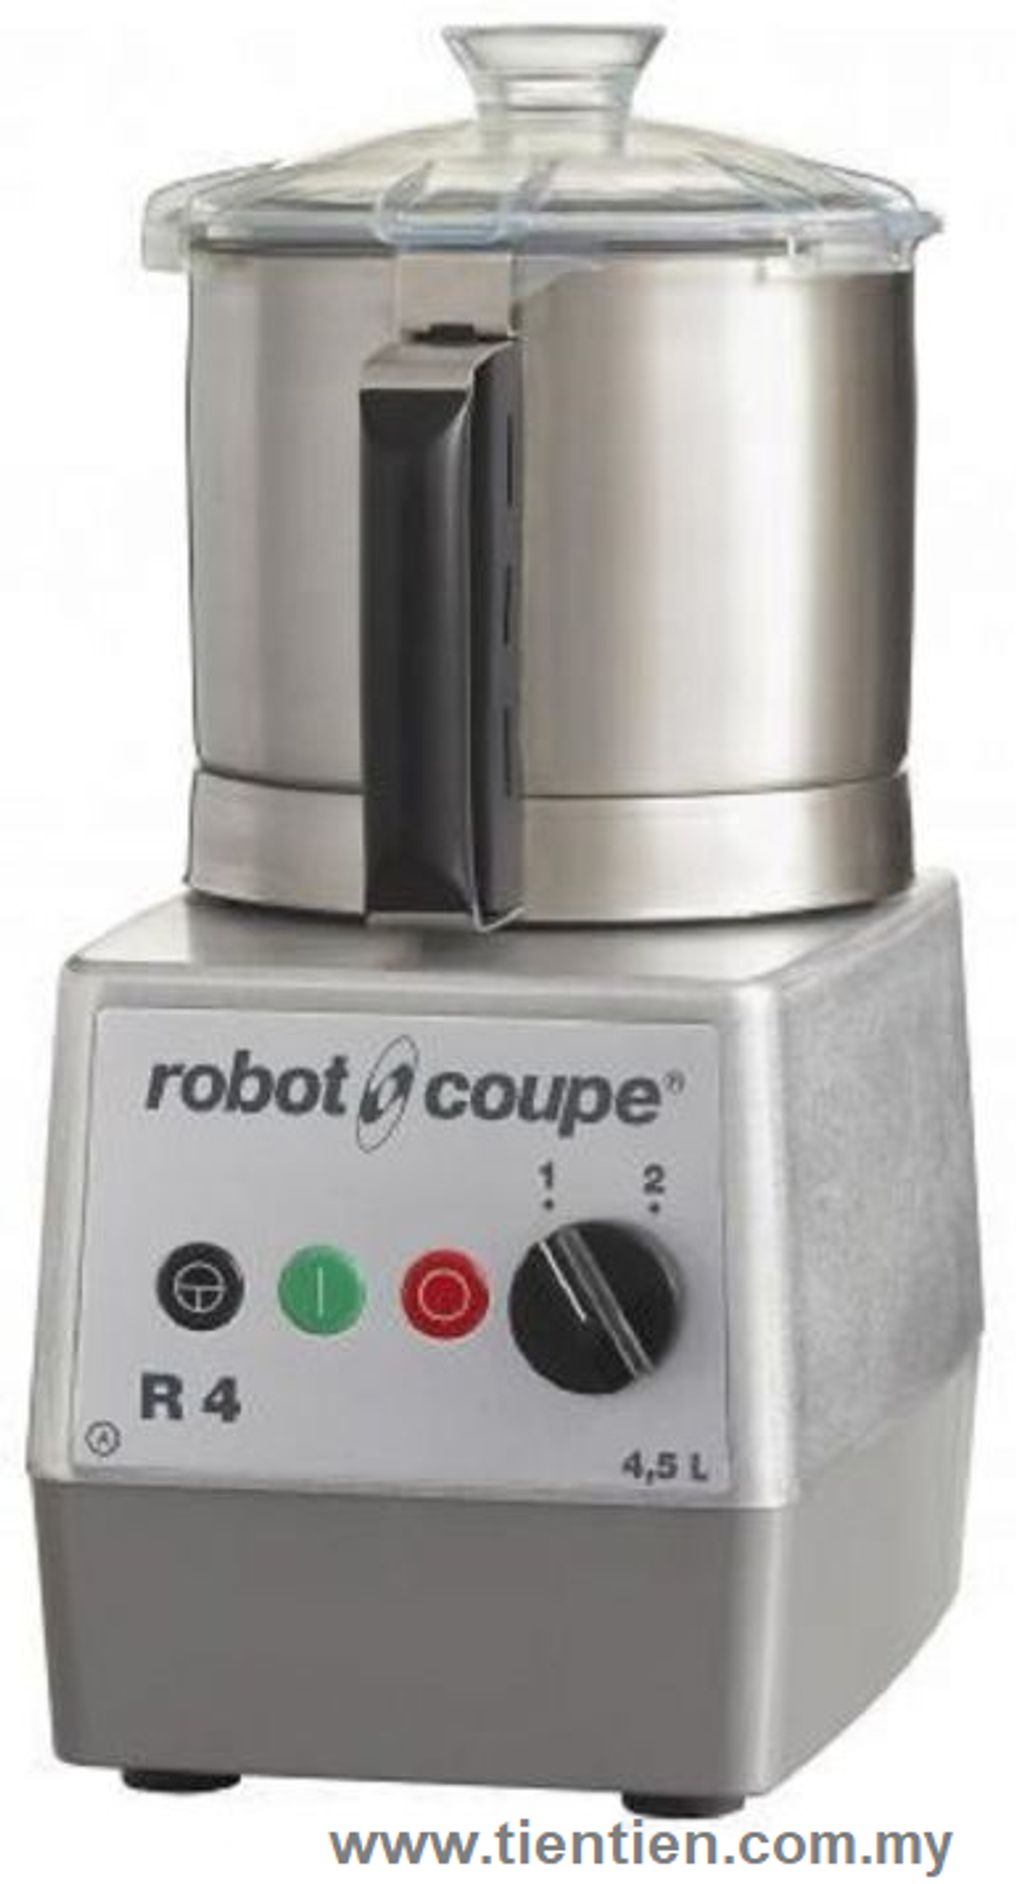 robot-coupe-4l-cutter-mixer-2speeds-r4-tientien-malaysia.png